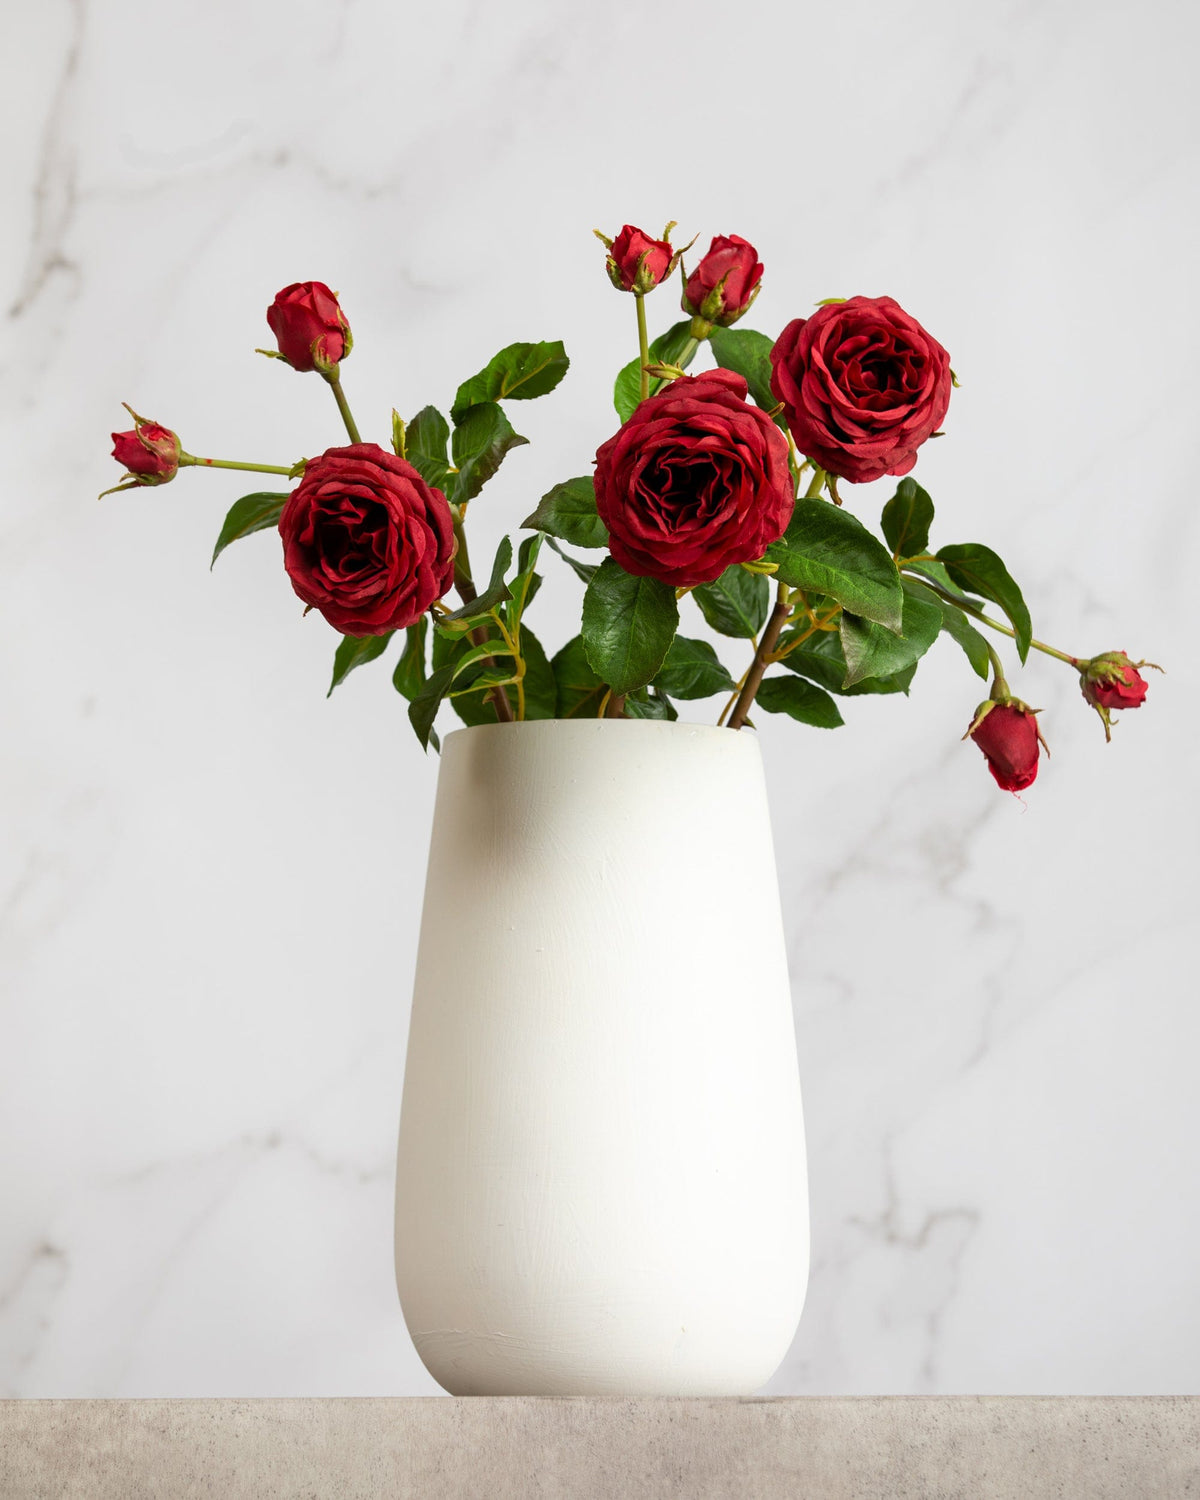 Prestige Botanicals Artificial Red Ecuadorian Roses in a white vase for Valentines Day